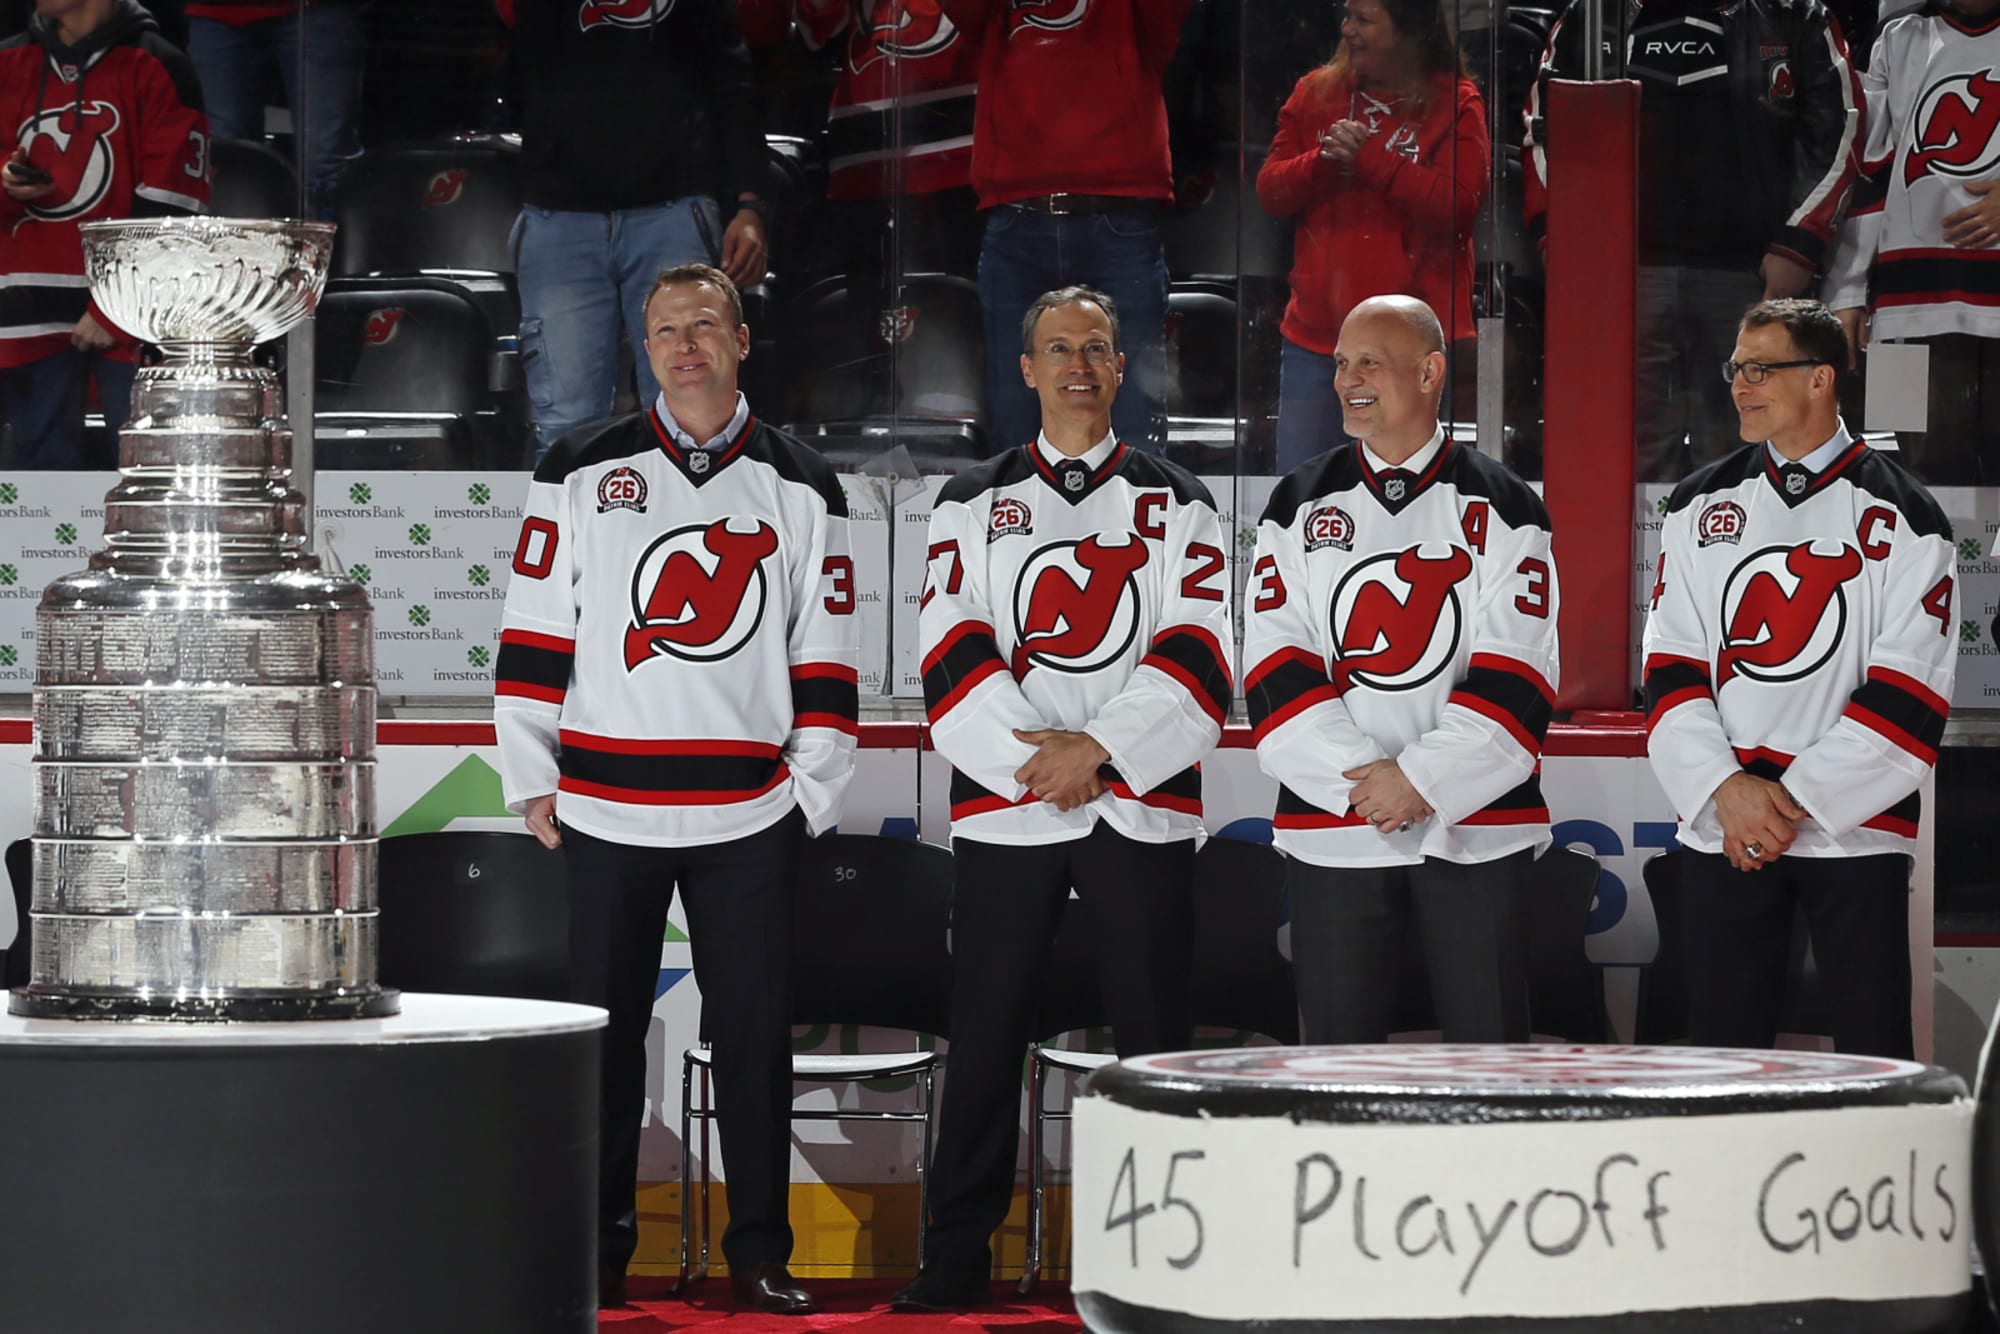 How Many Points Can We Expect from the Devils Top Players?